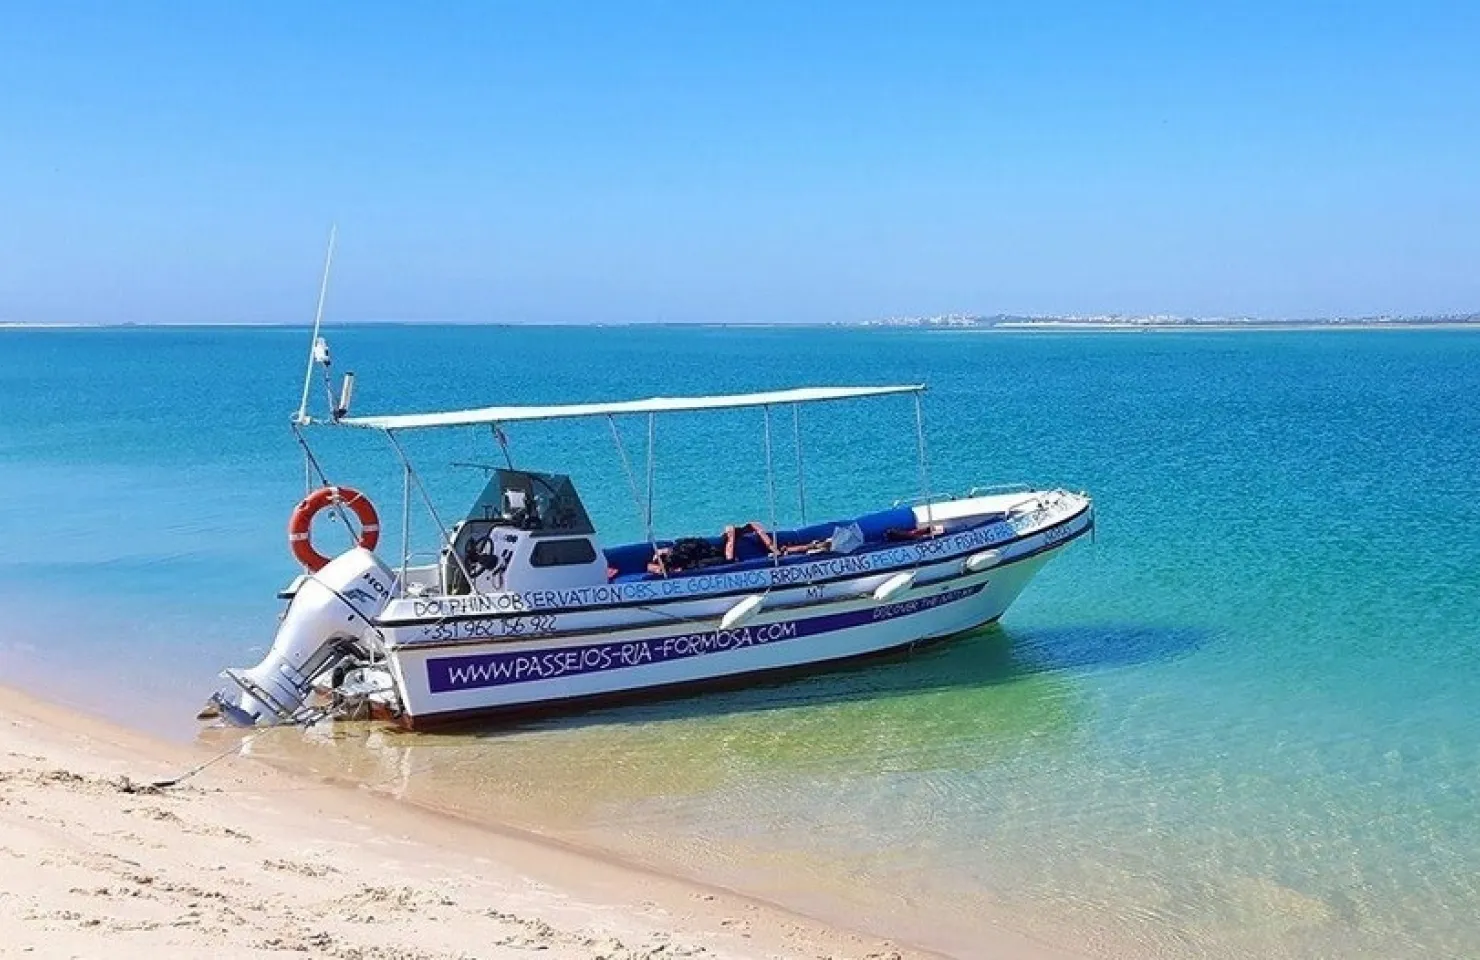 Islands Tour SpeedBoat - 4 Hour - Activities and Things to Do in Ria Formosa Natural Park